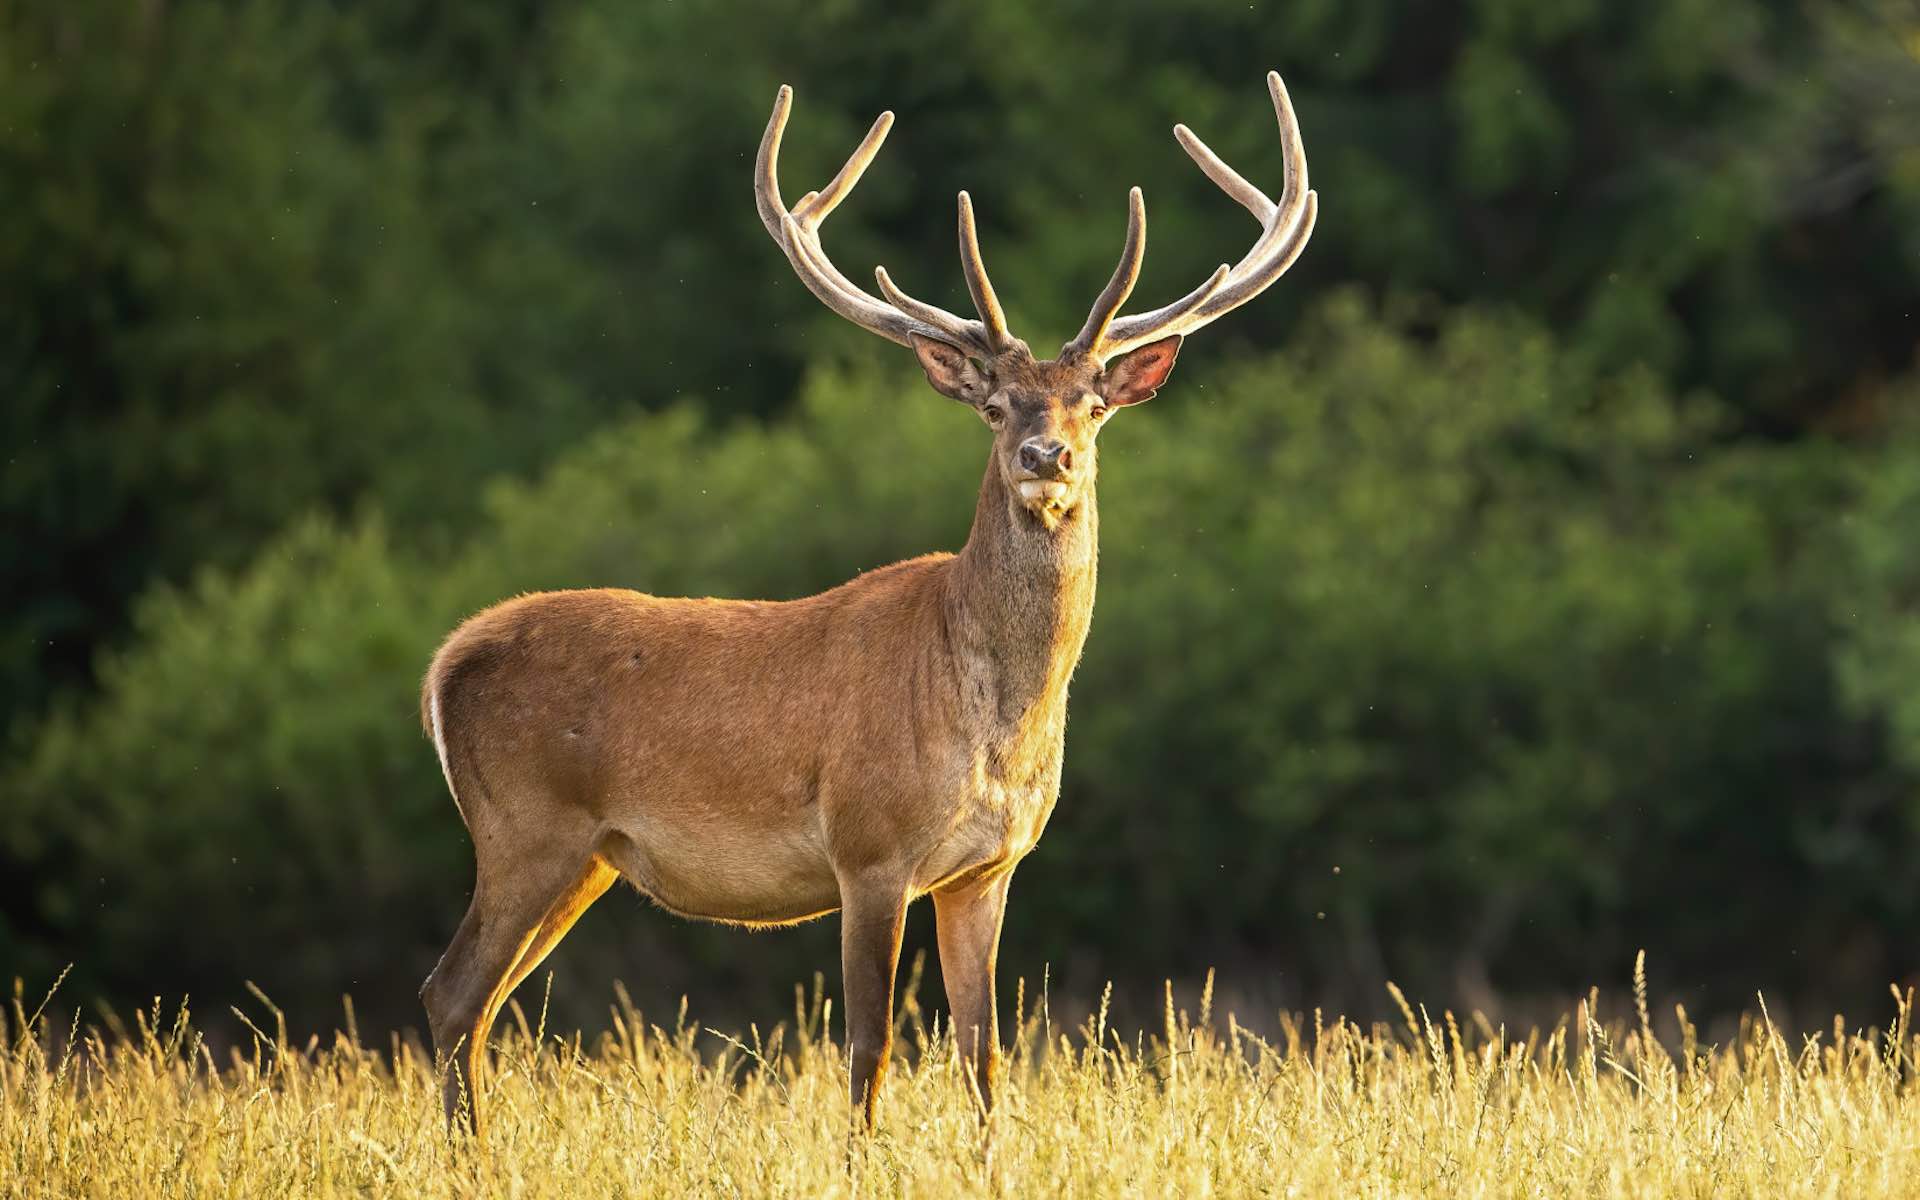 Yellowstone Park confirms first case of zombie deer disease